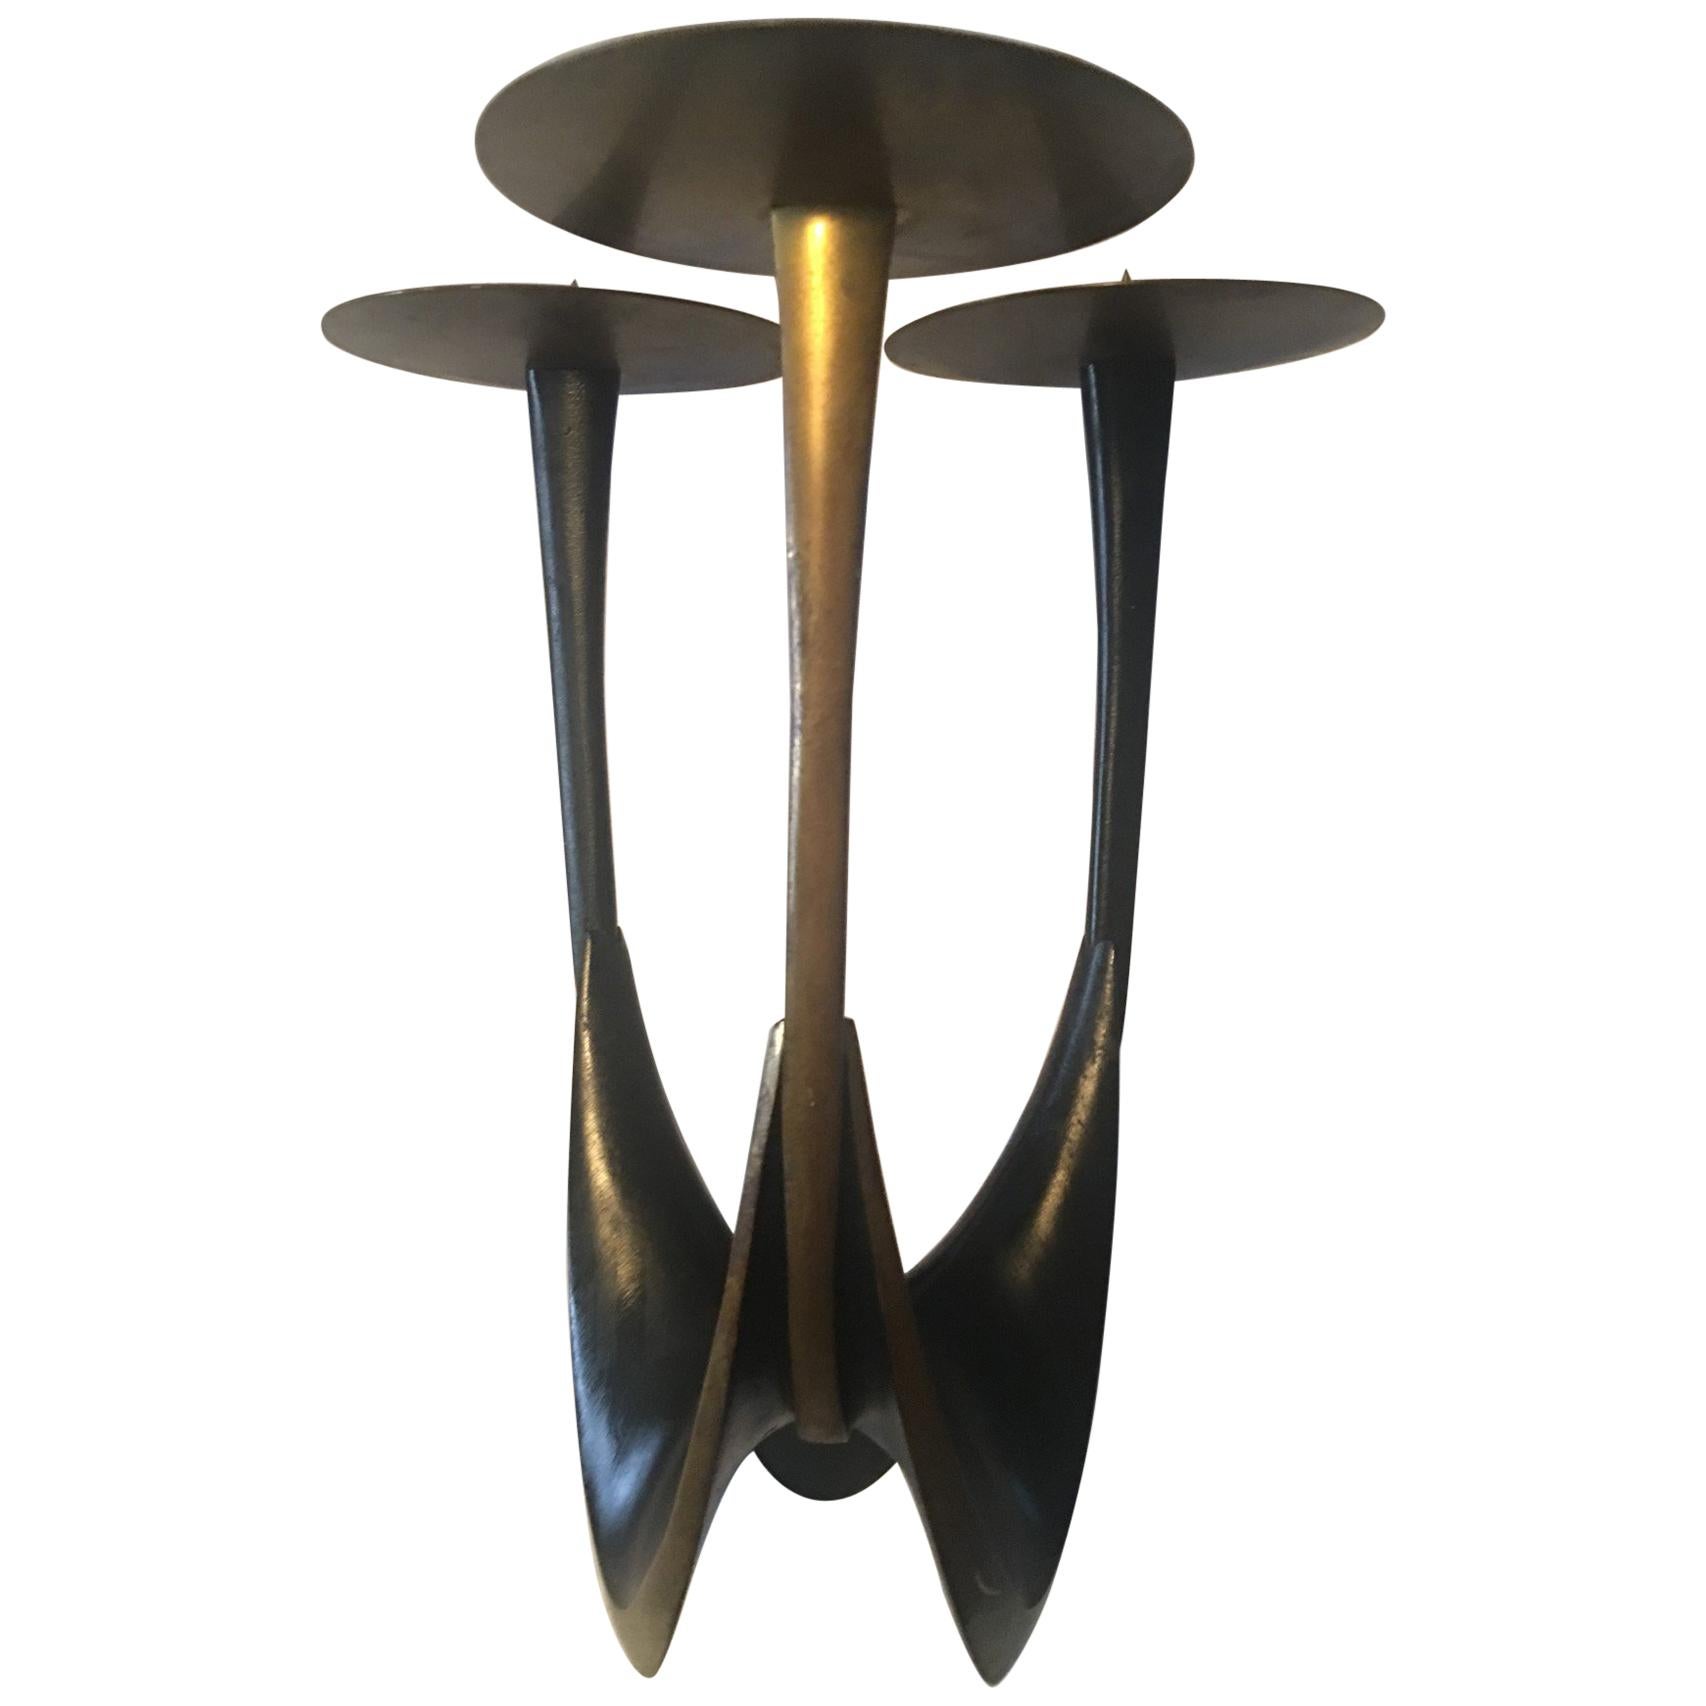 1950s Brass Three-Armed Candleholder by Klaus Ullrich for Faber & Schumacher For Sale